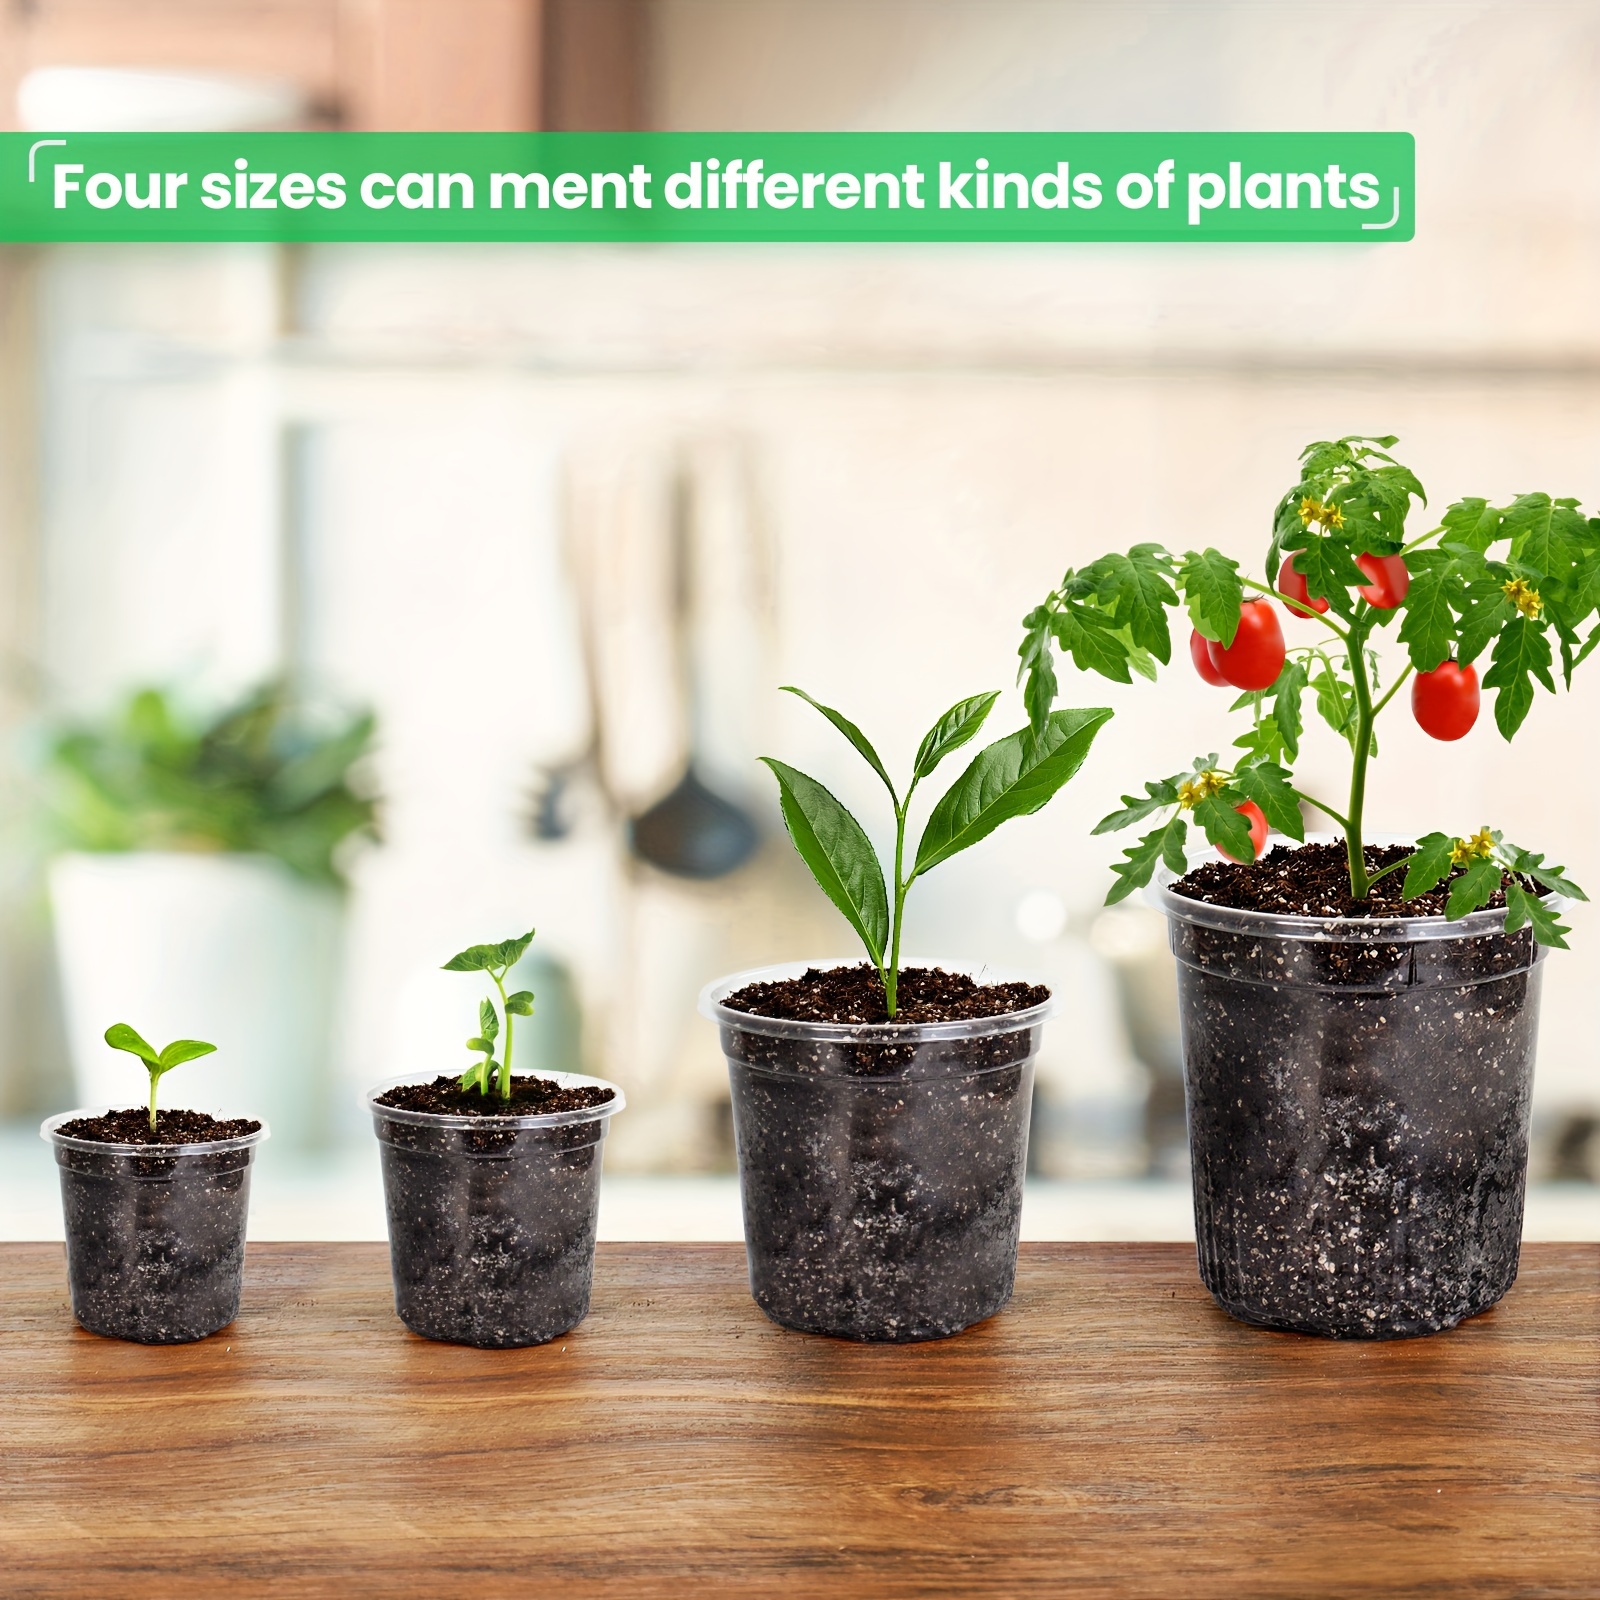 

36-piece Clear Nursery Pots With Drainage Holes - Durable Plastic Seedling Planters For Indoor & Outdoor Use, Assorted Sizes (6.7", 5", 4", 3.5")